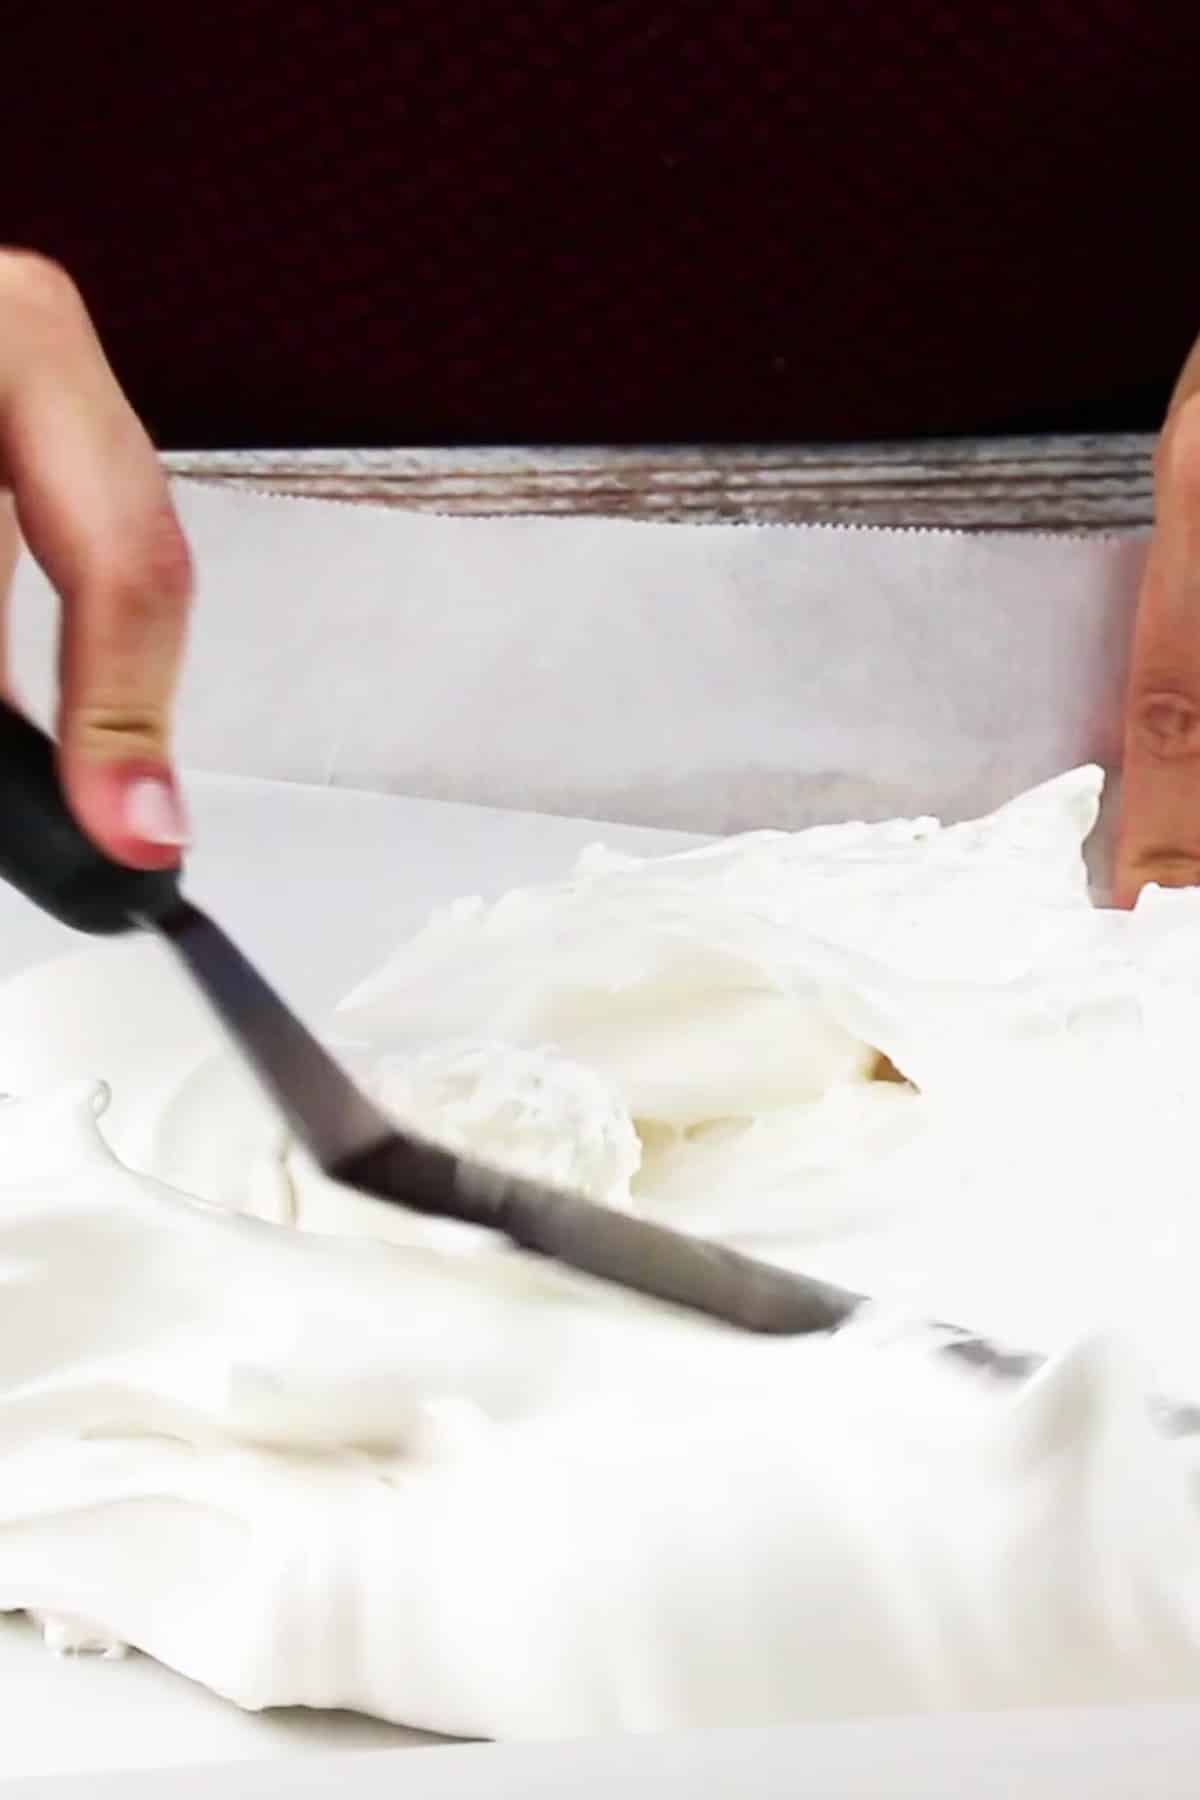 marshmallow fluff being spread out on a sheet pan lined with parchment paper.